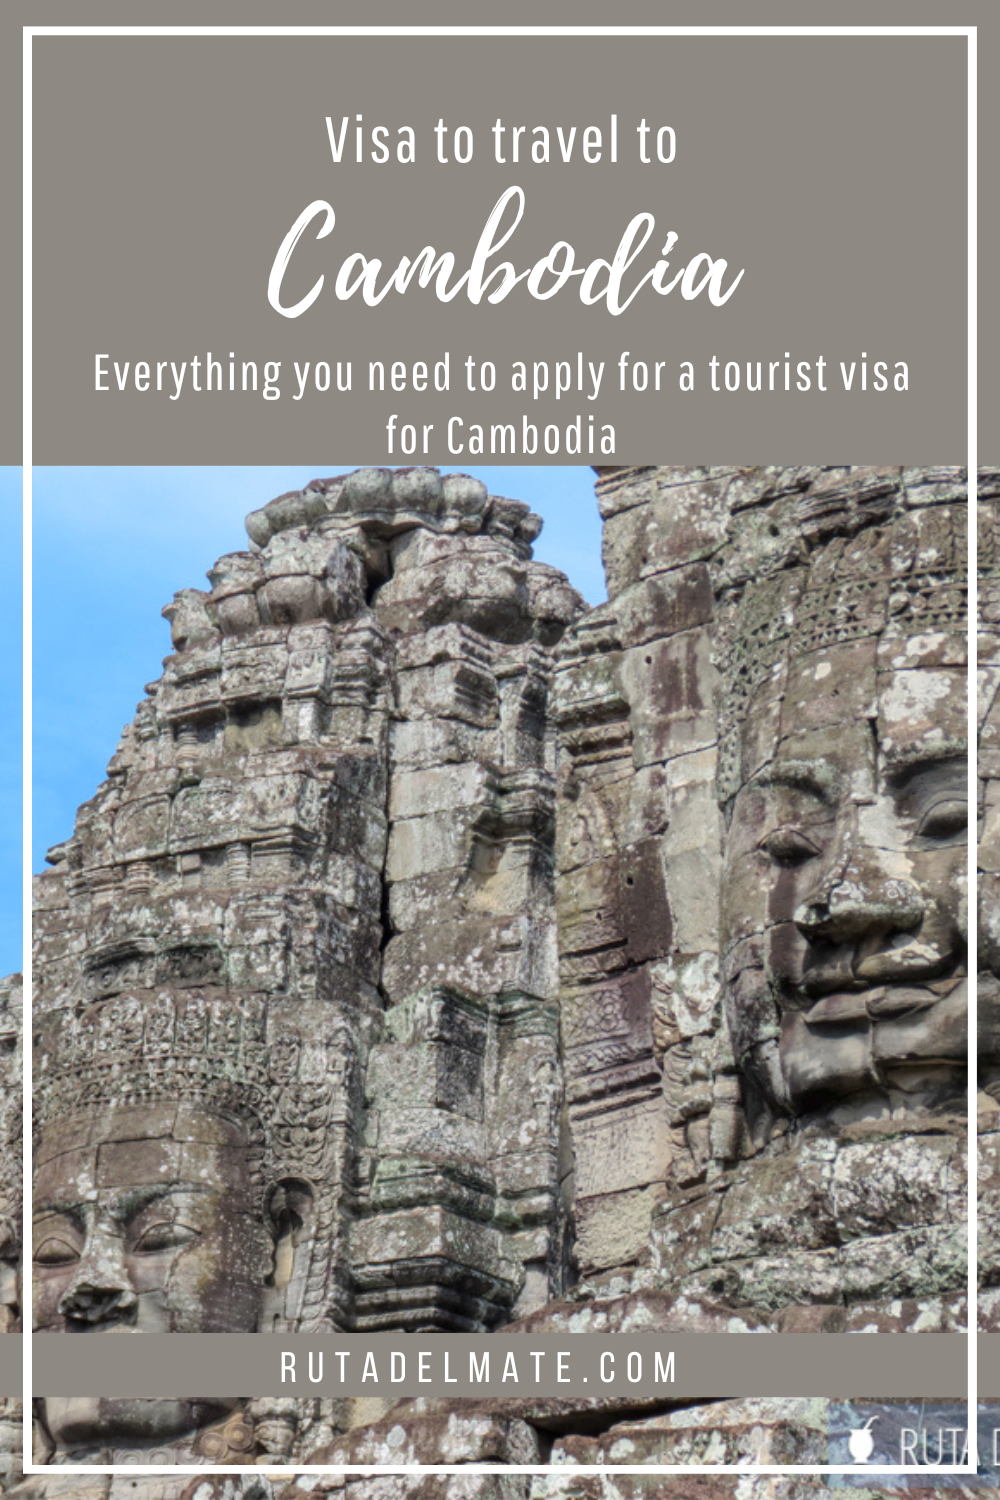 How to obtain a visa to travel to Cambodia